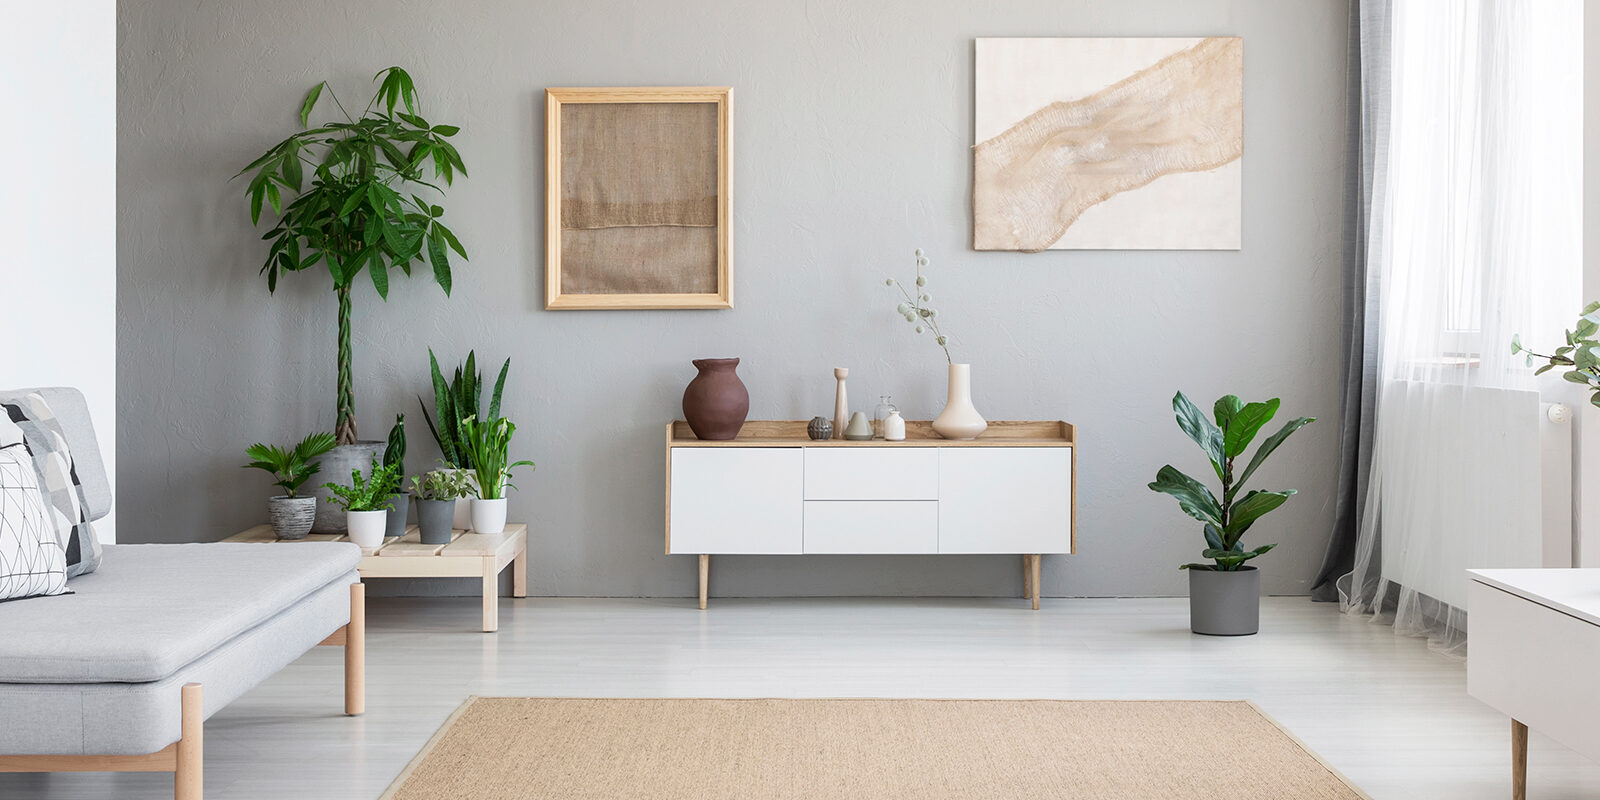 Guide to Creating a Minimalist Living Space